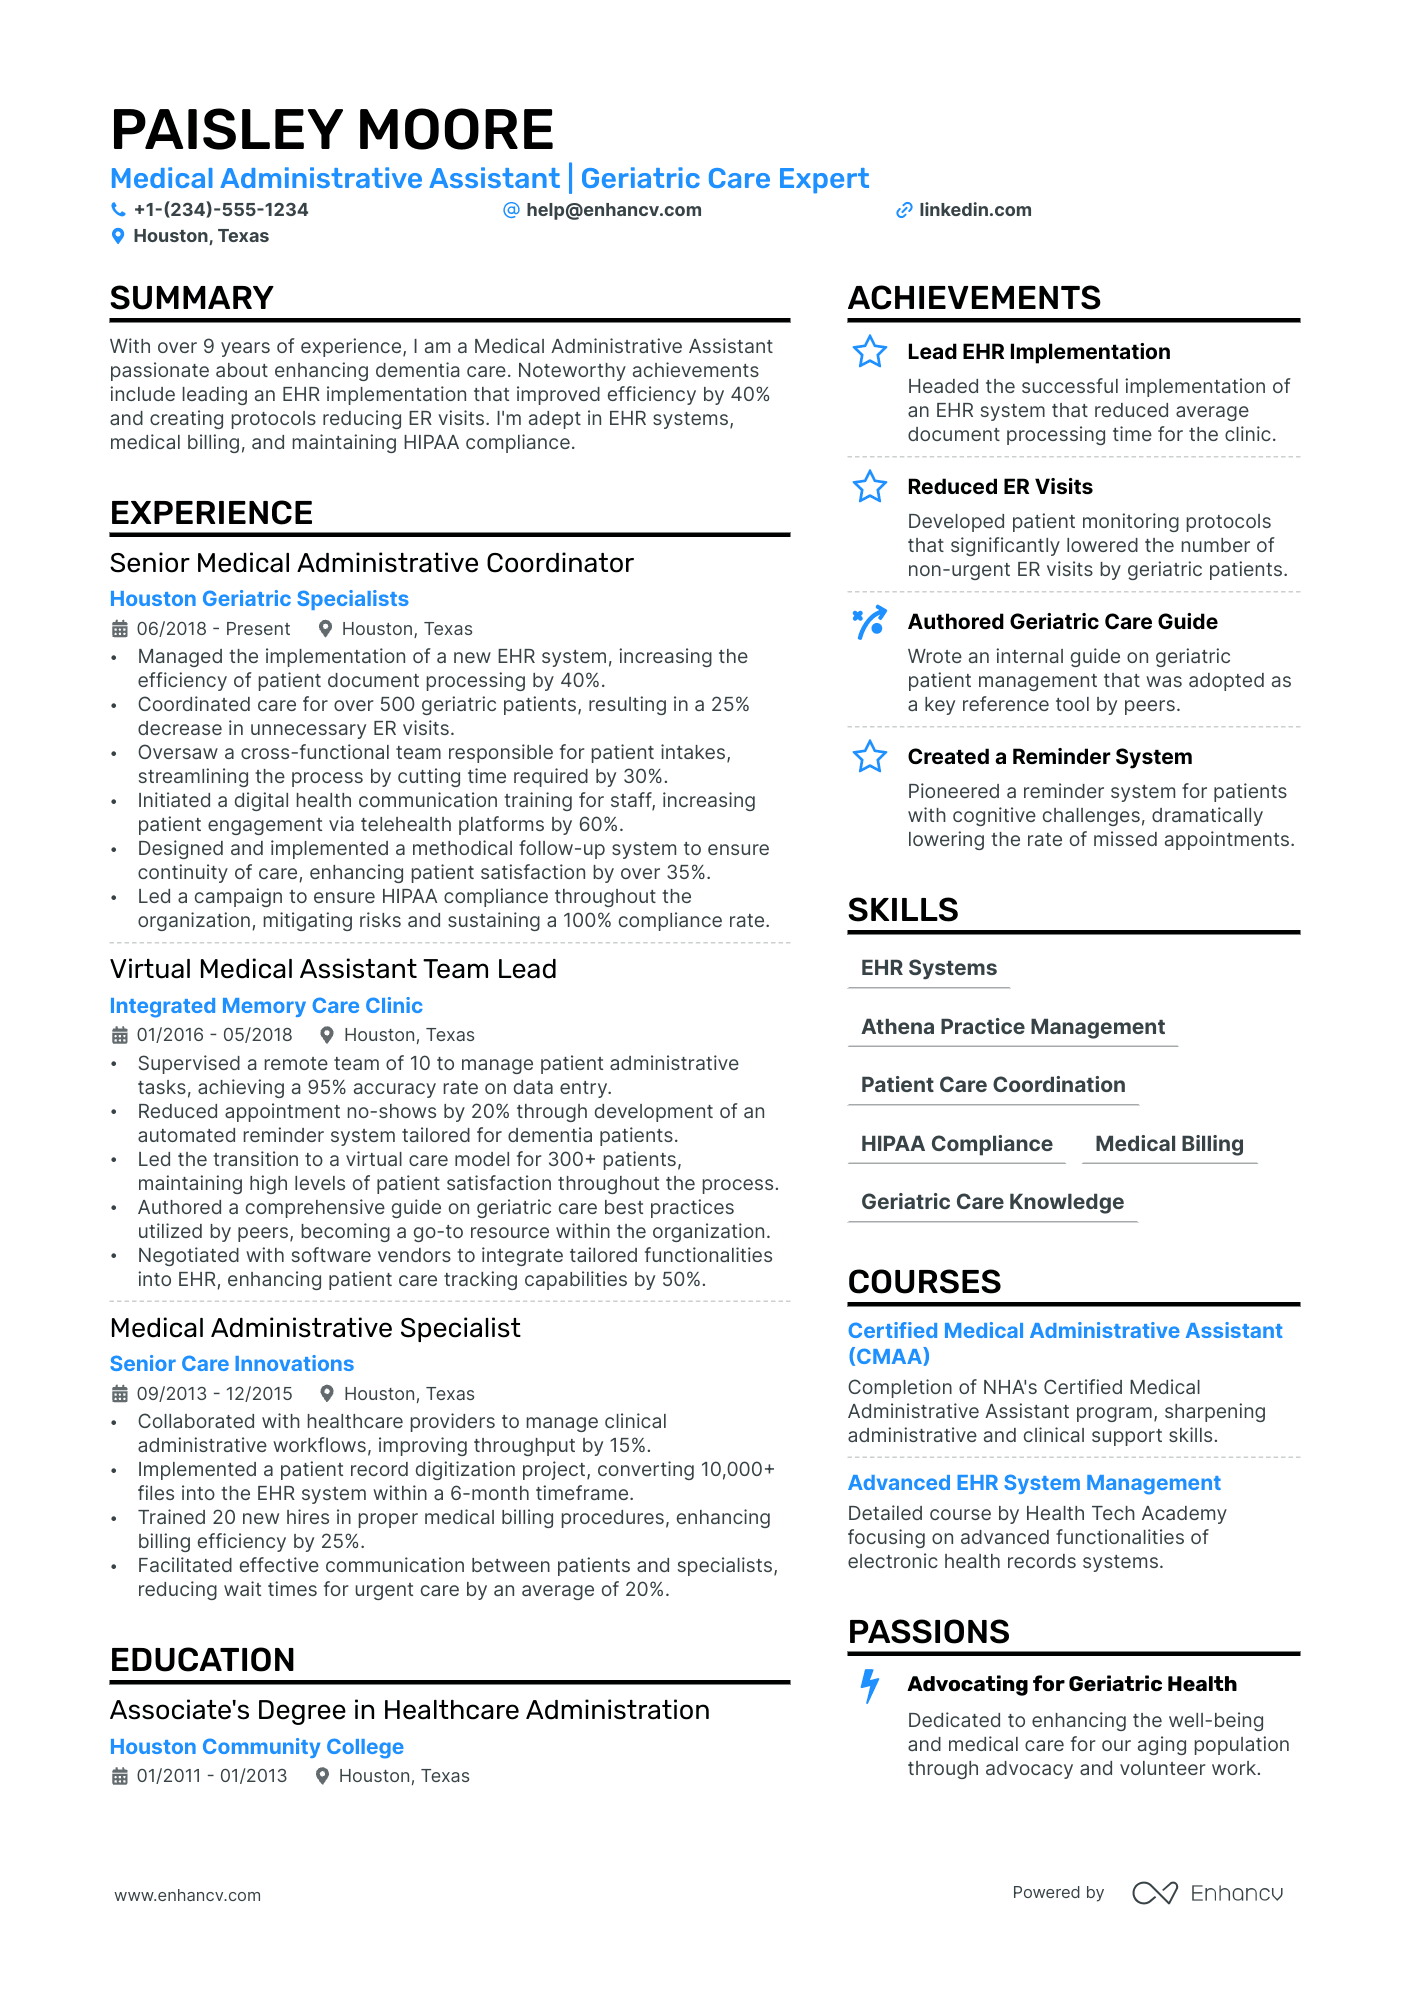 best resume examples for administrative assistant